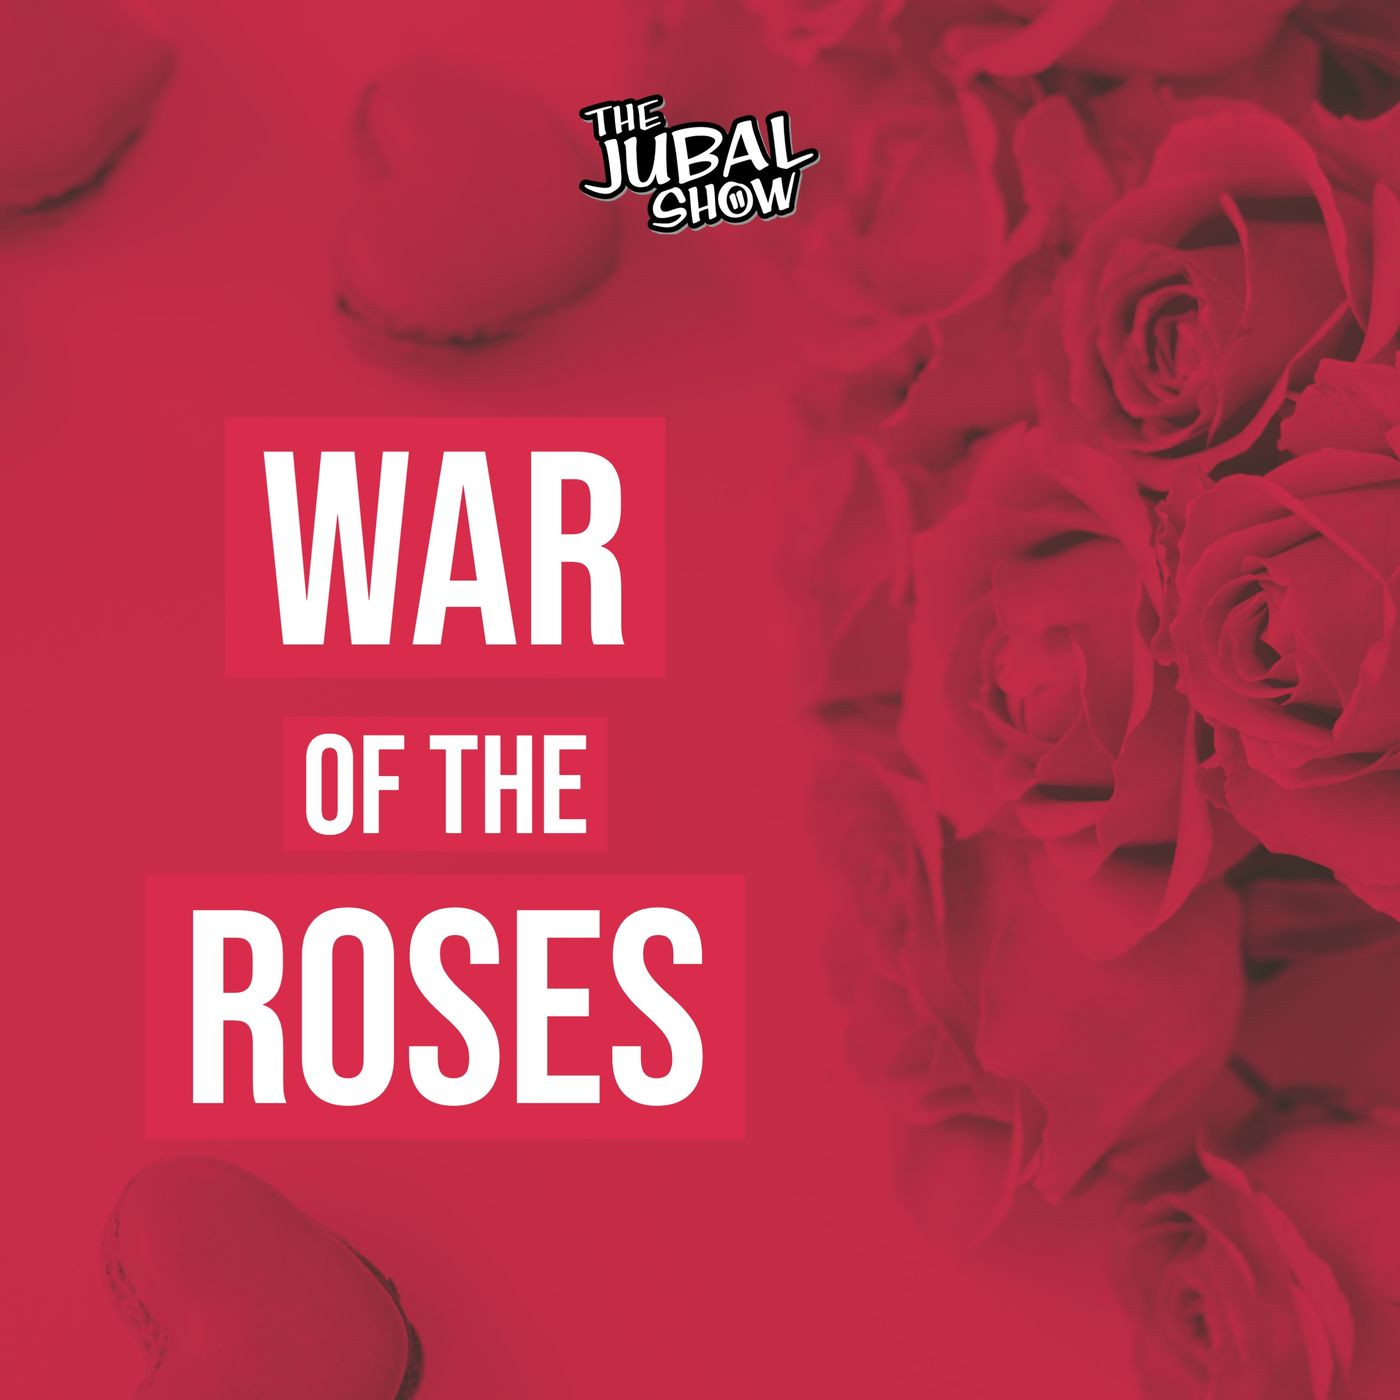 This War Of The Roses started with a babysitter being bribed!